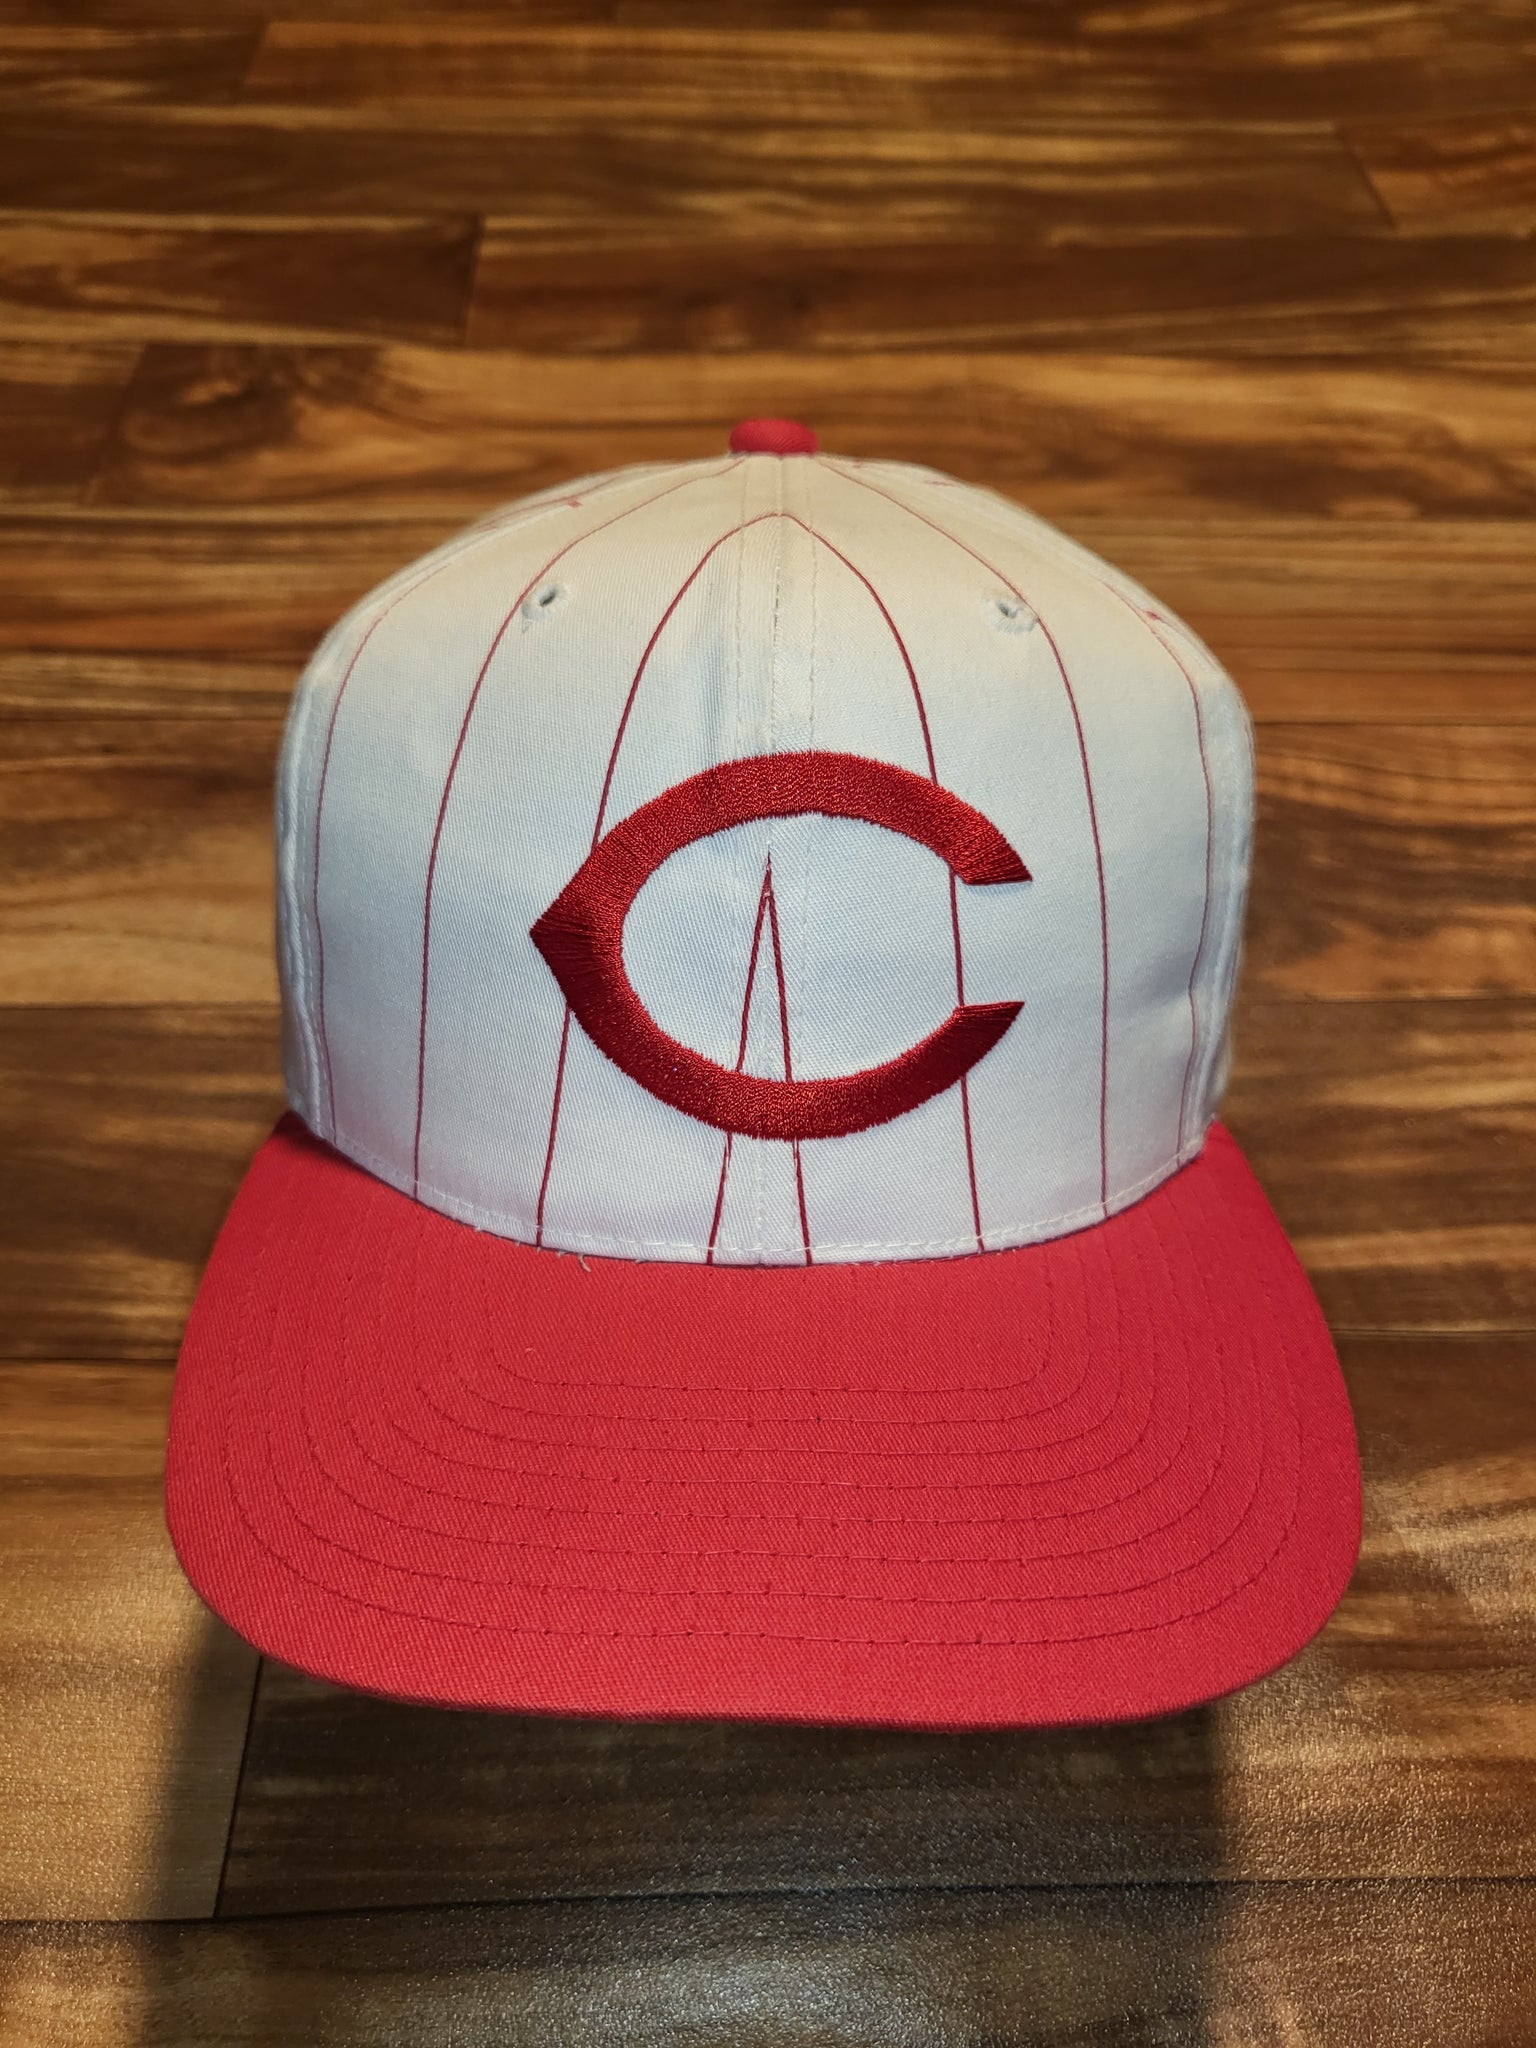 Vintage CINCINNATI REDS NEW ERA 59/50 *PINSTRIPE* HAT NEW Old Stock FITTED  7-1/8